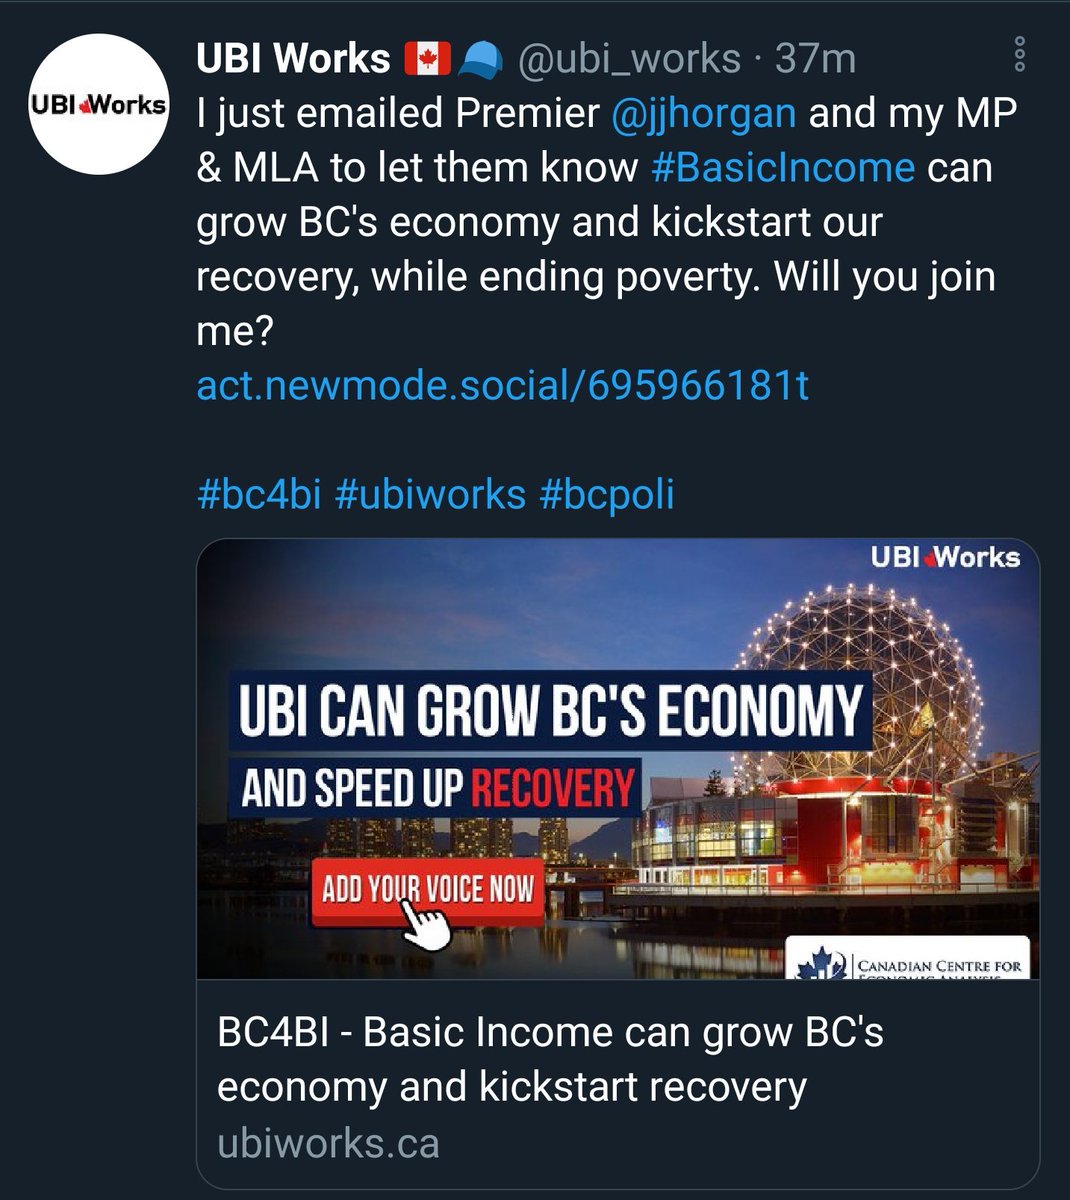 Thread:I'm anxious about UBI/BI program implementation for many reasons. One of them being the enthusiasm of conservative & capitalist driven groups like UBI Works, which have invested $ into a campaign to lobby against the recent BC report ( https://bcbasicincomepanel.ca/ )  #nlpoli  https://twitter.com/Alleyson/status/1355244482195816452